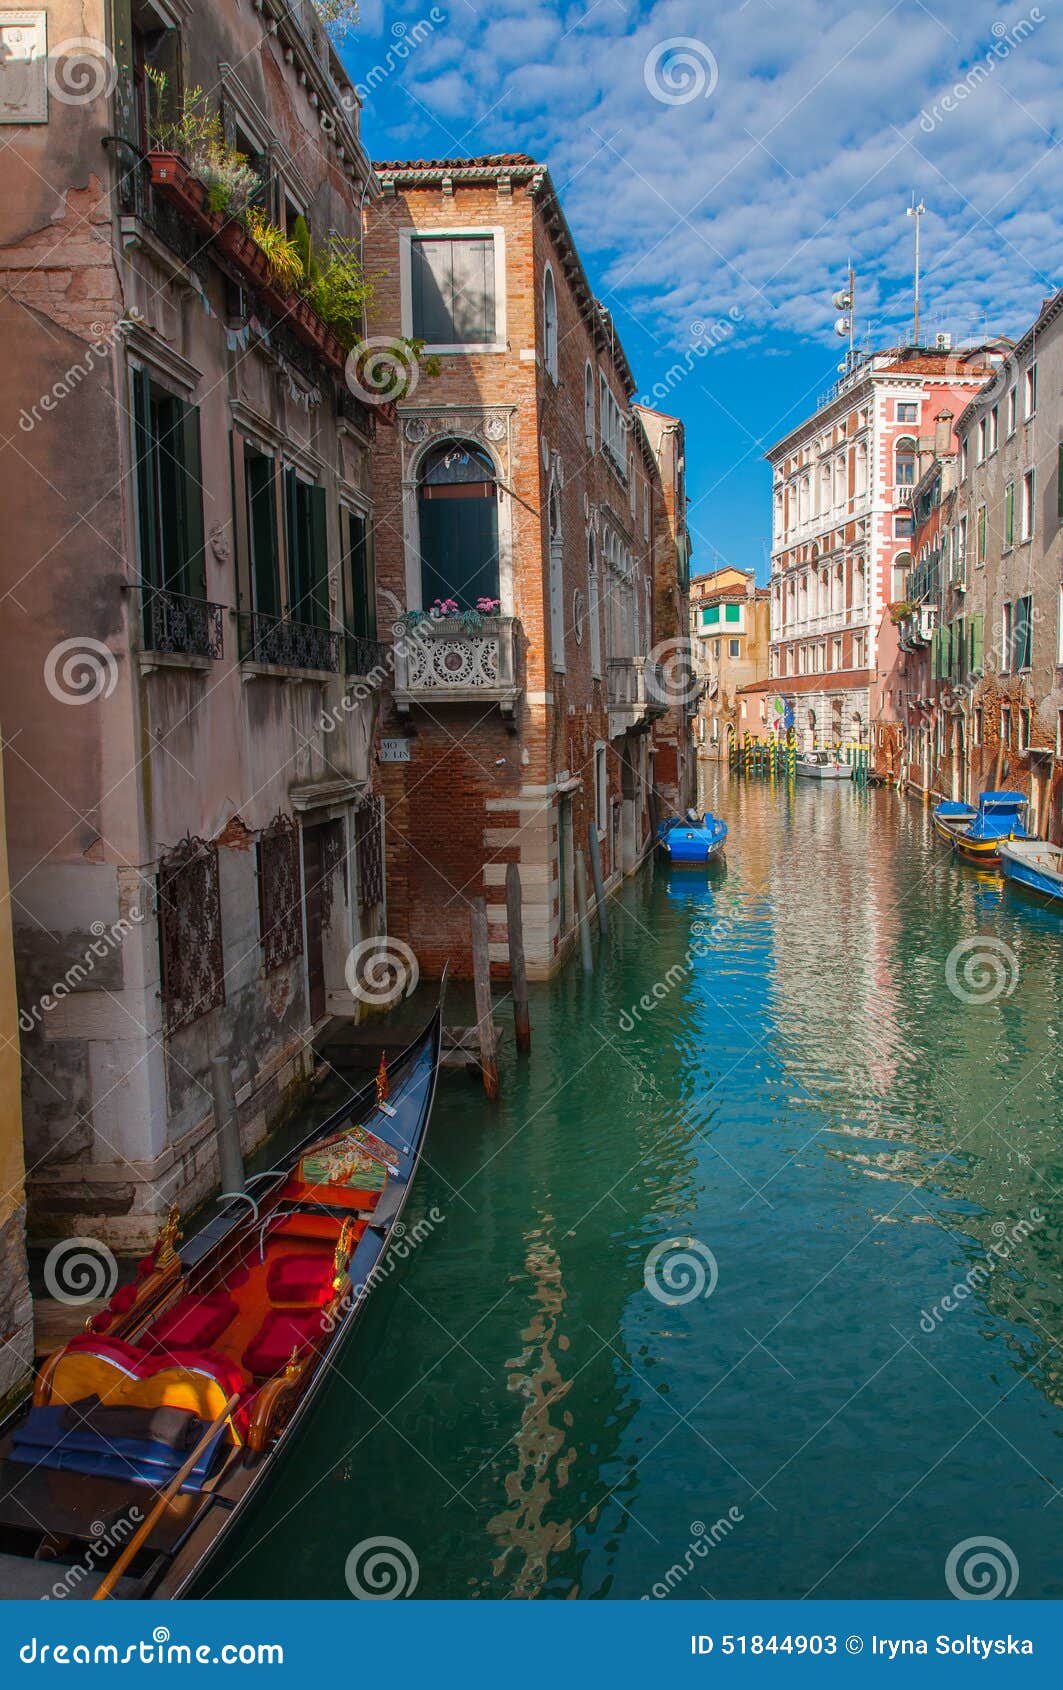 Sunny Day in Venice, Italy. Stock Image - Image of majestic, famous ...